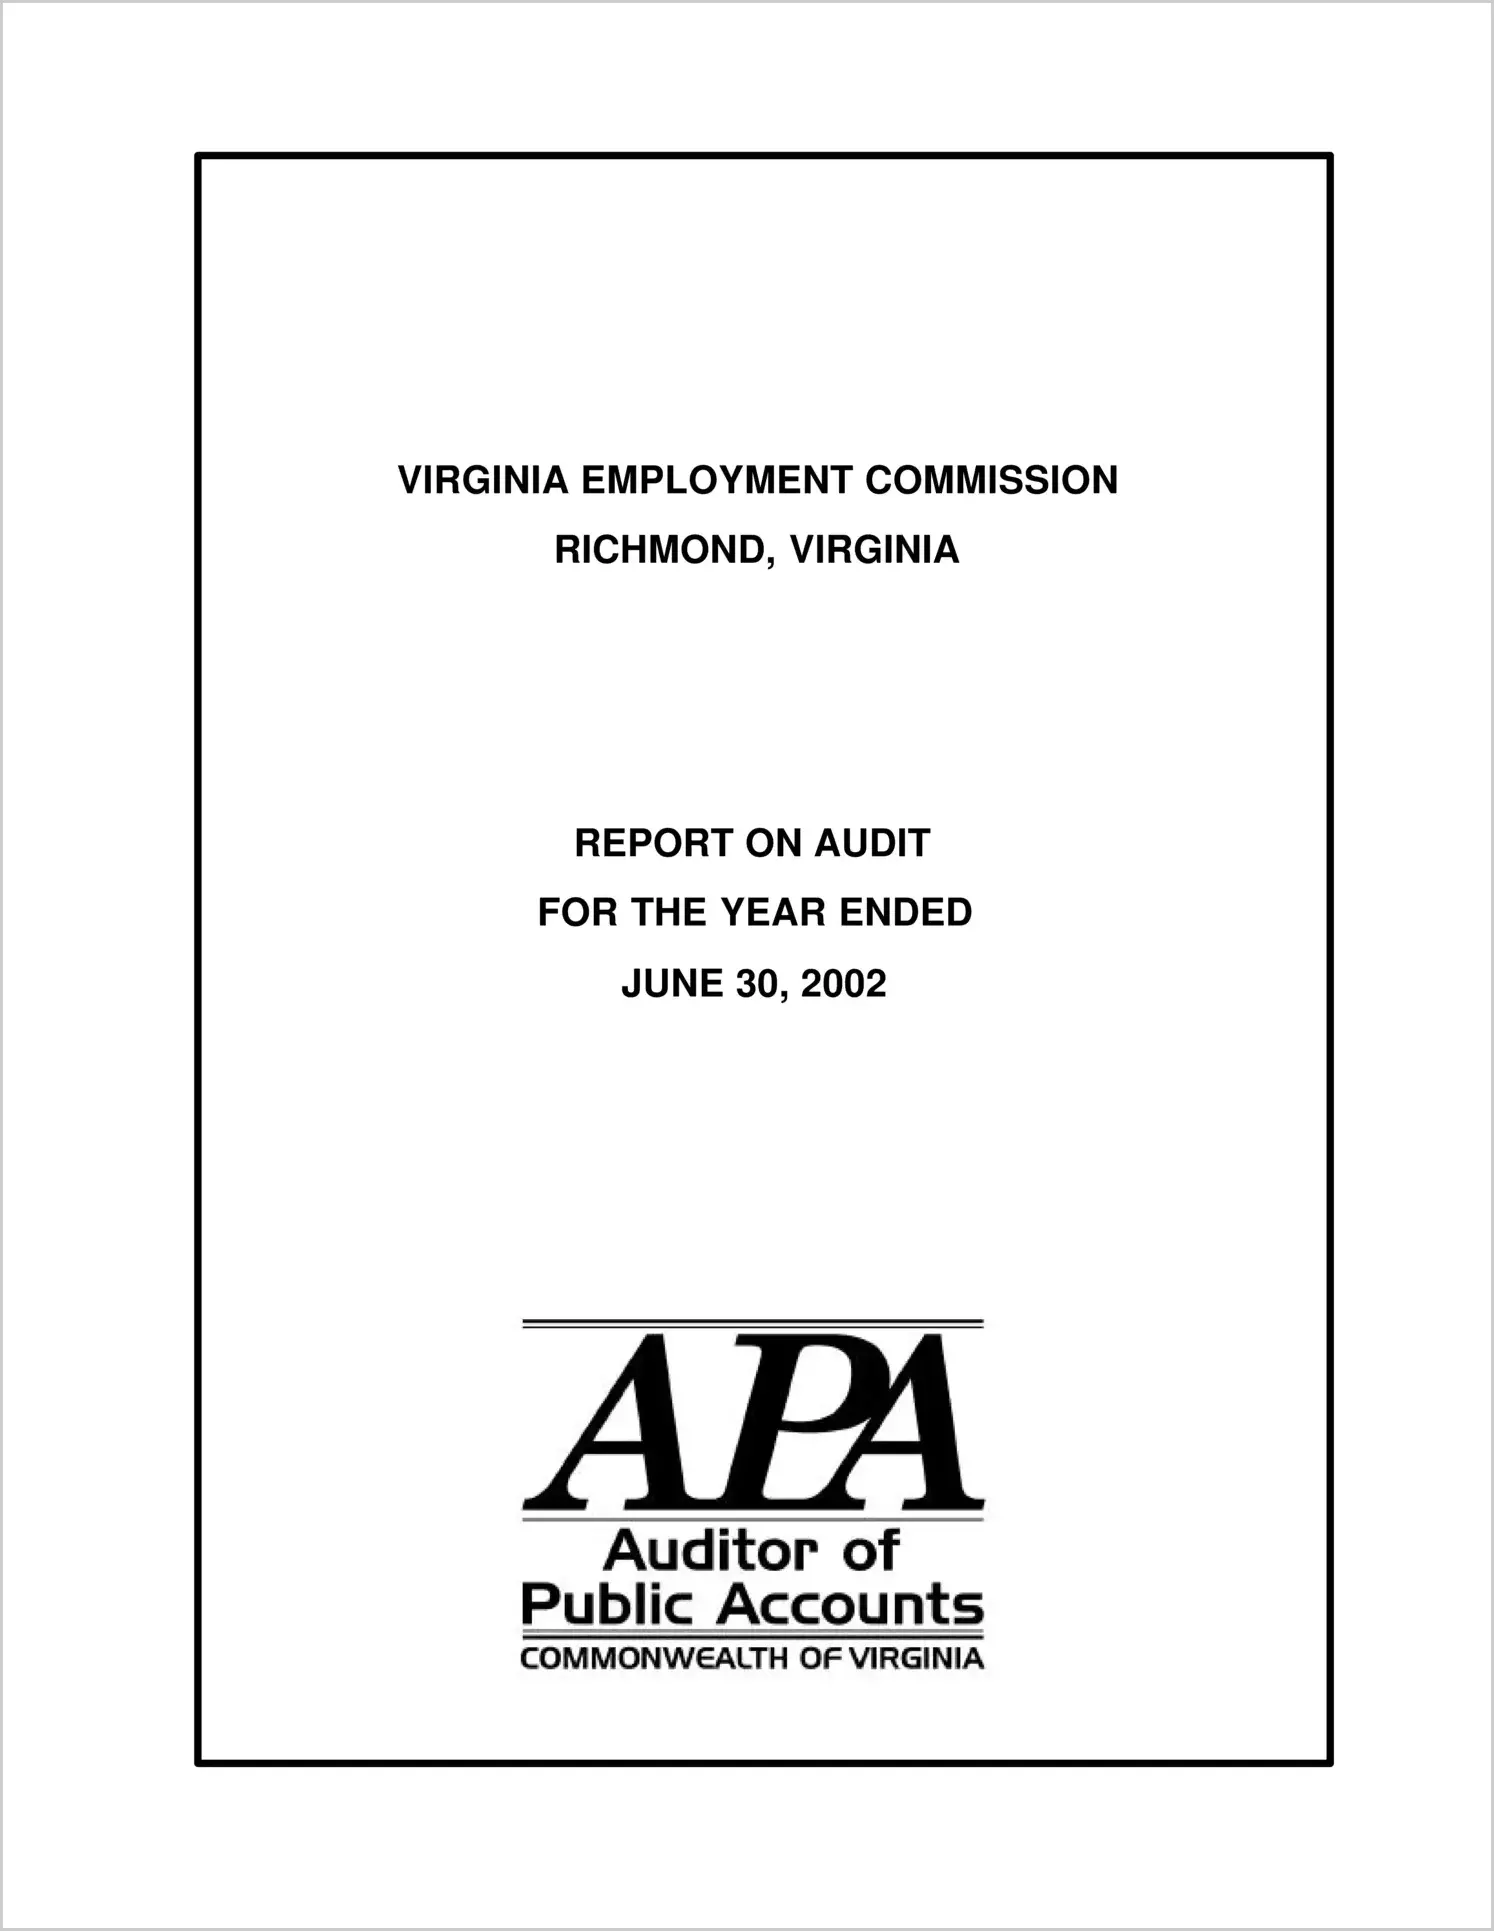 Virginia Employment Commission for the year ended June 30, 2002